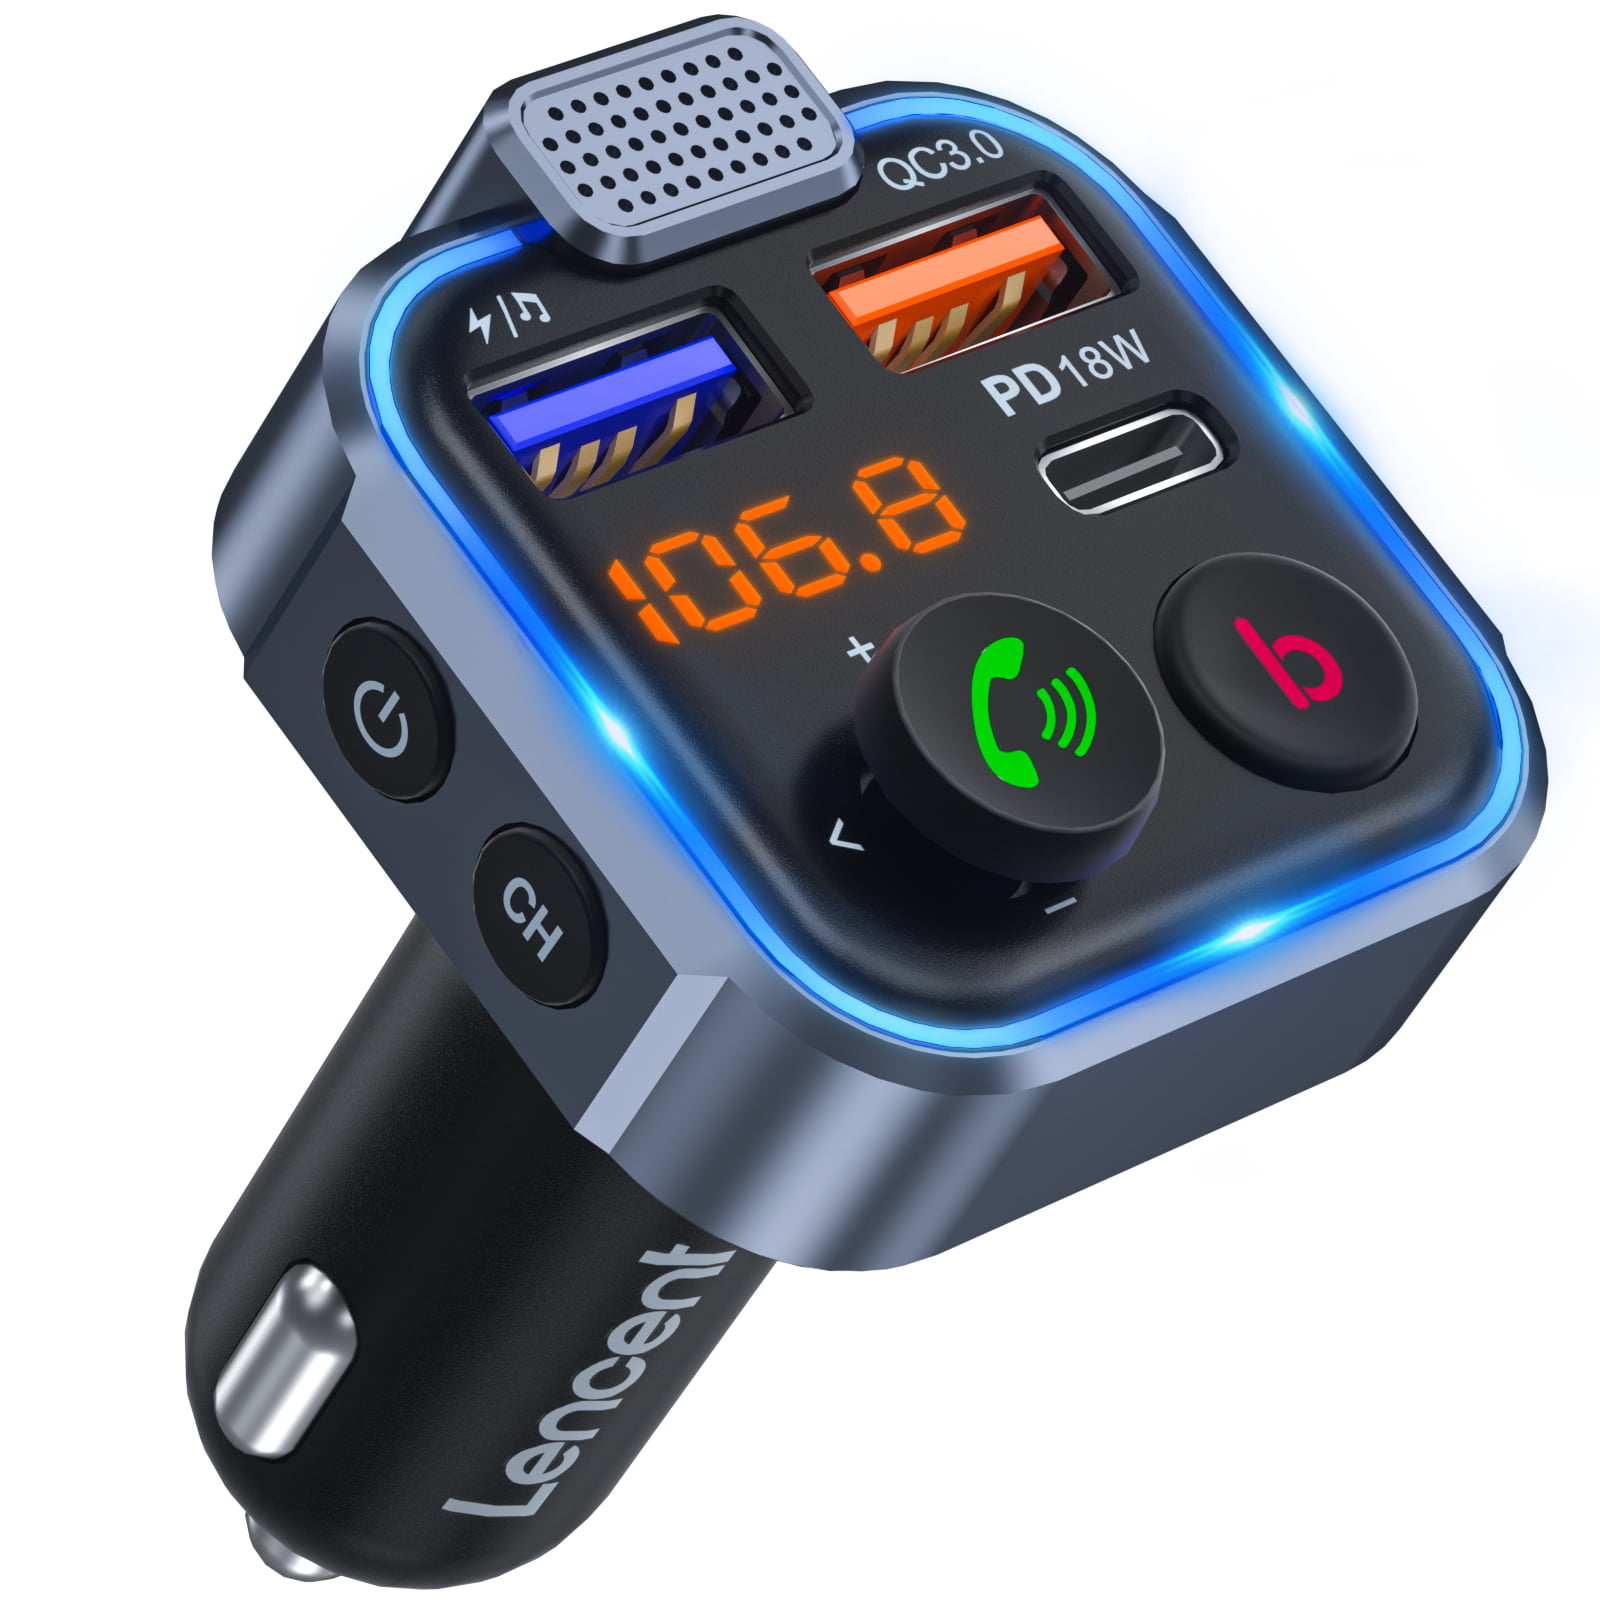 BT Wireless Radio FM Transmitter for Car With a Fast Charge 2.1A USB Port 